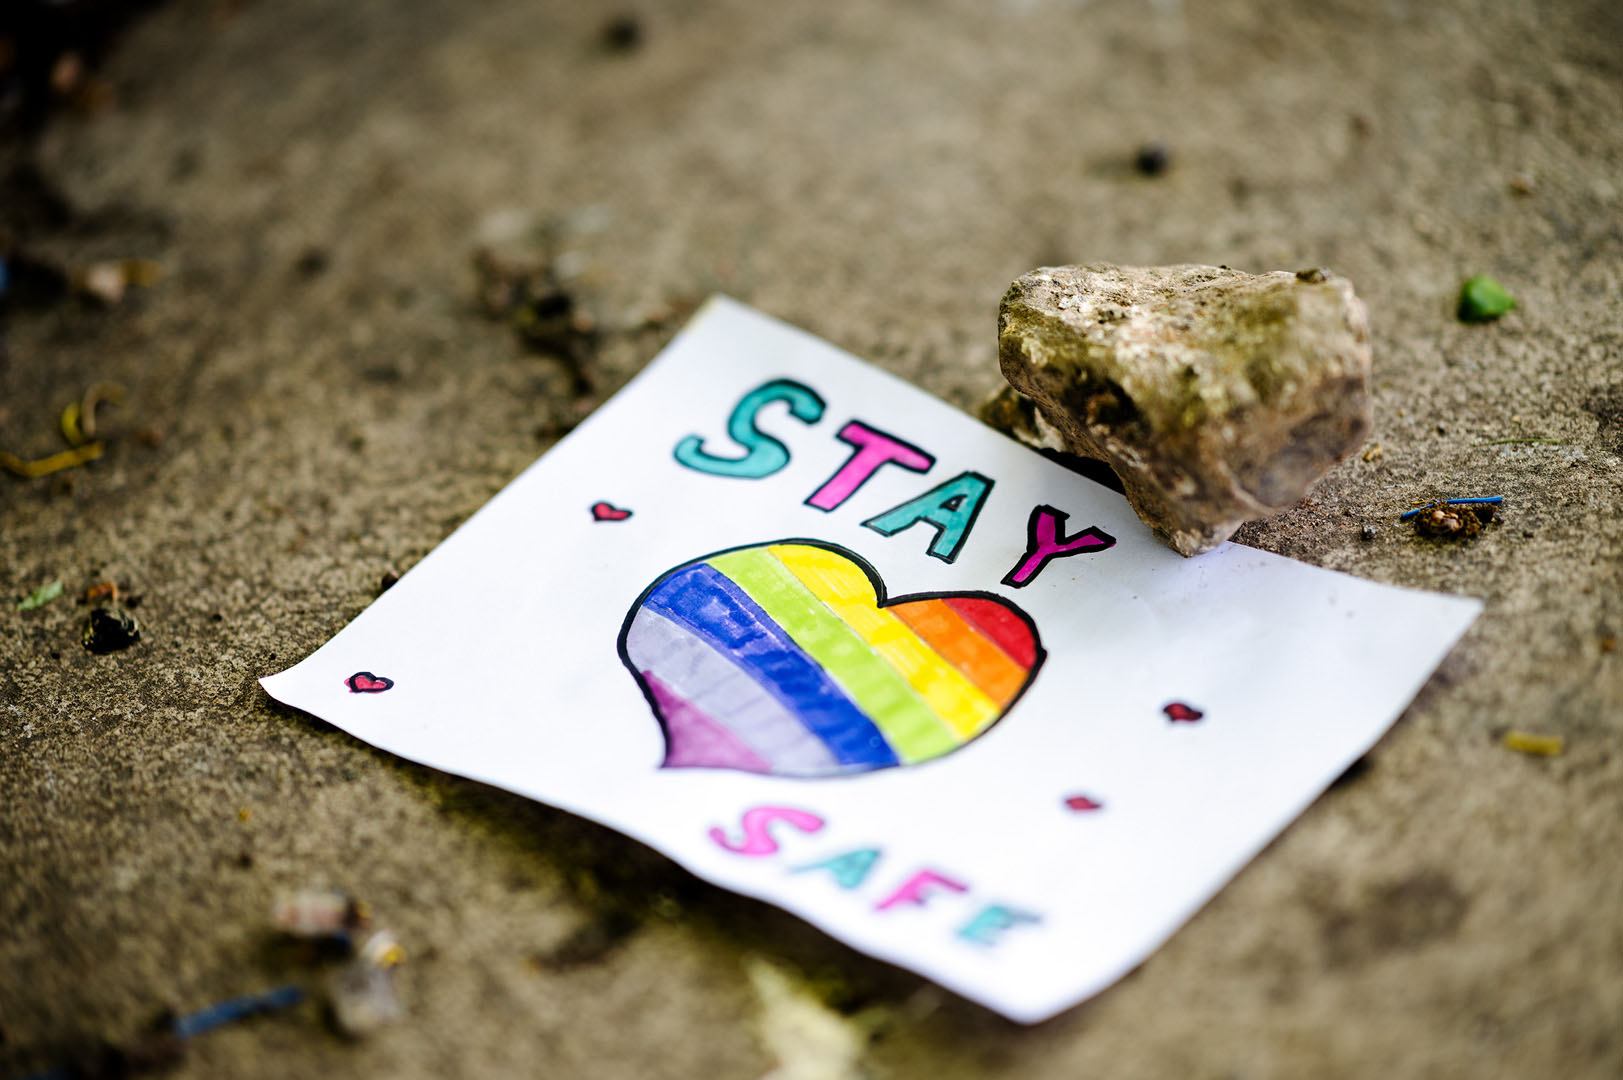 Stay safe rainbow heart drawing on pavement during lockdown